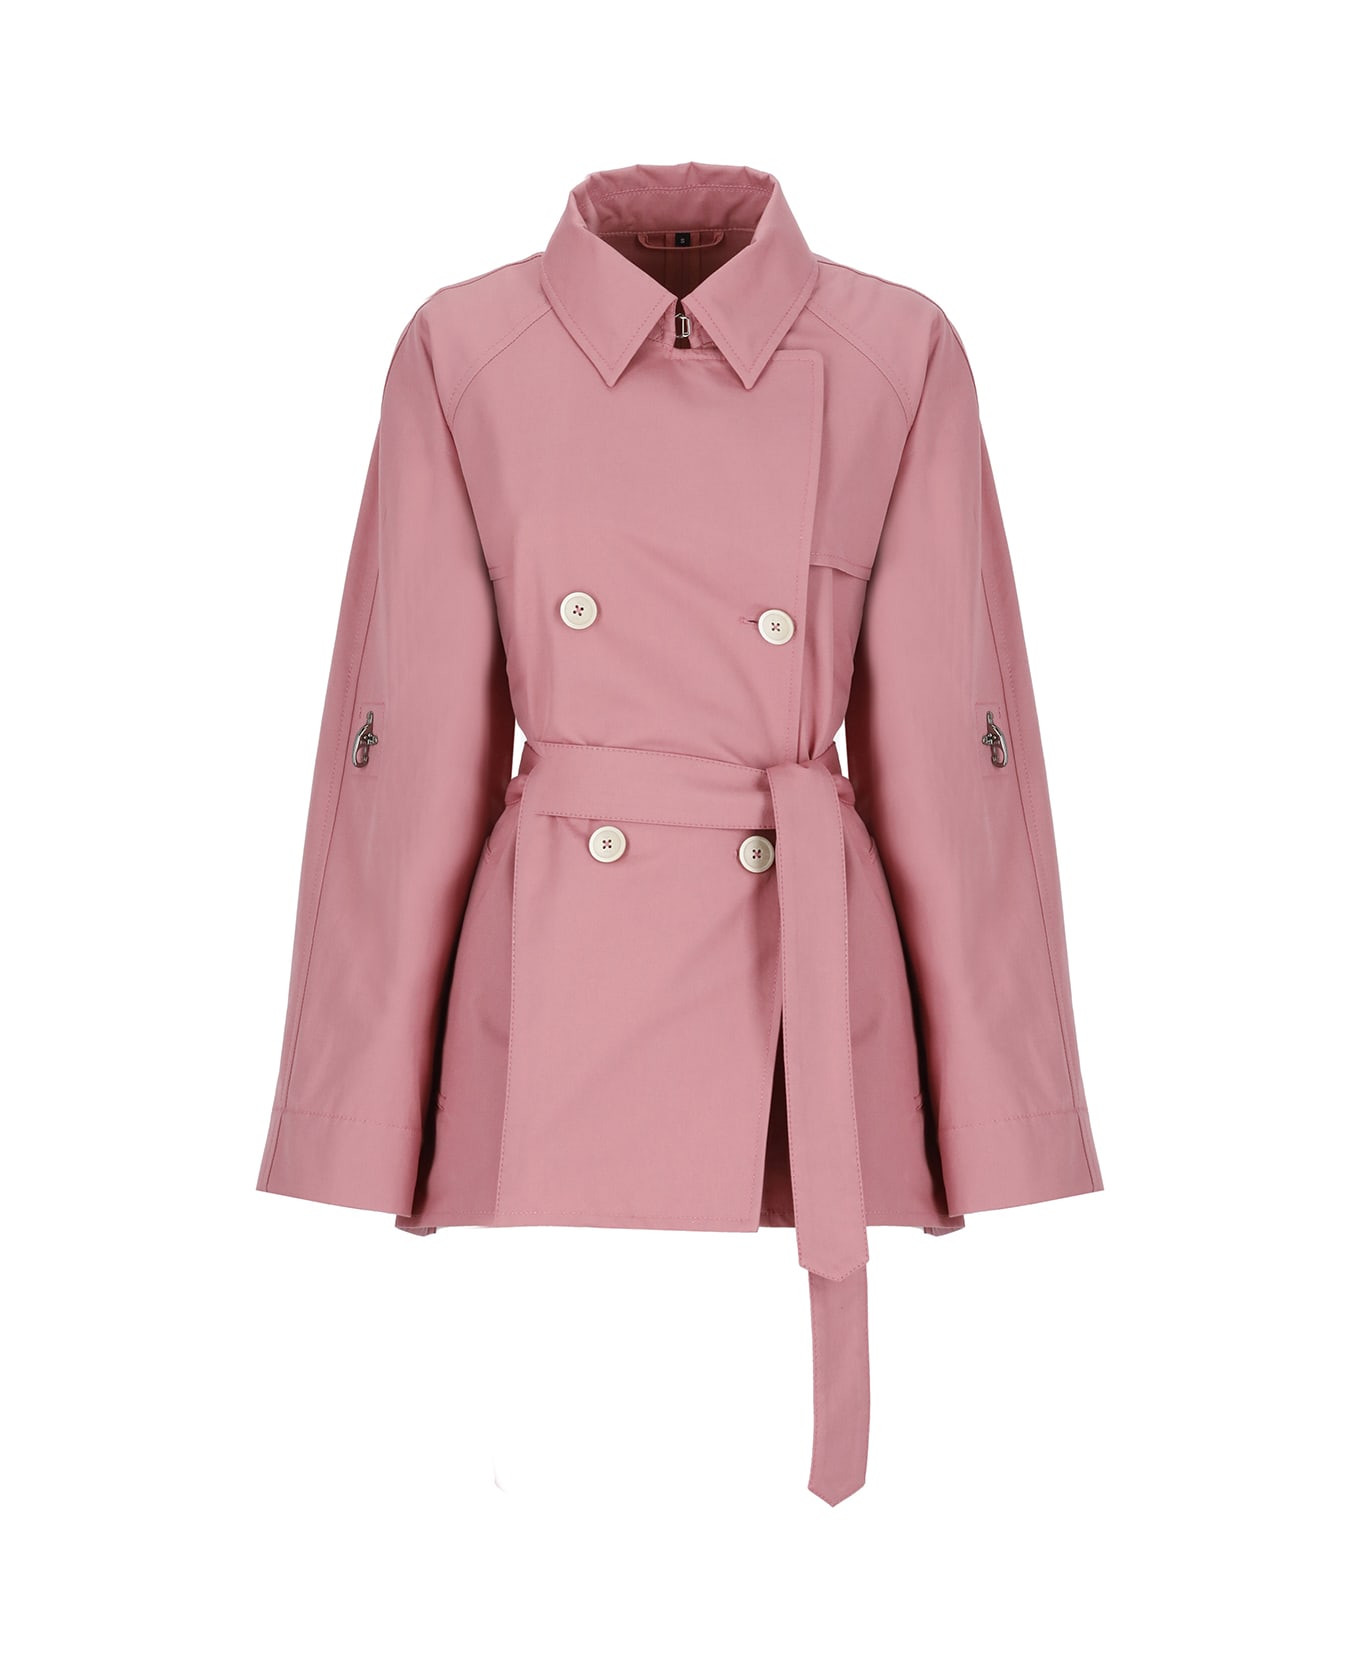 Fay Short Pink Trench Coat - Pink